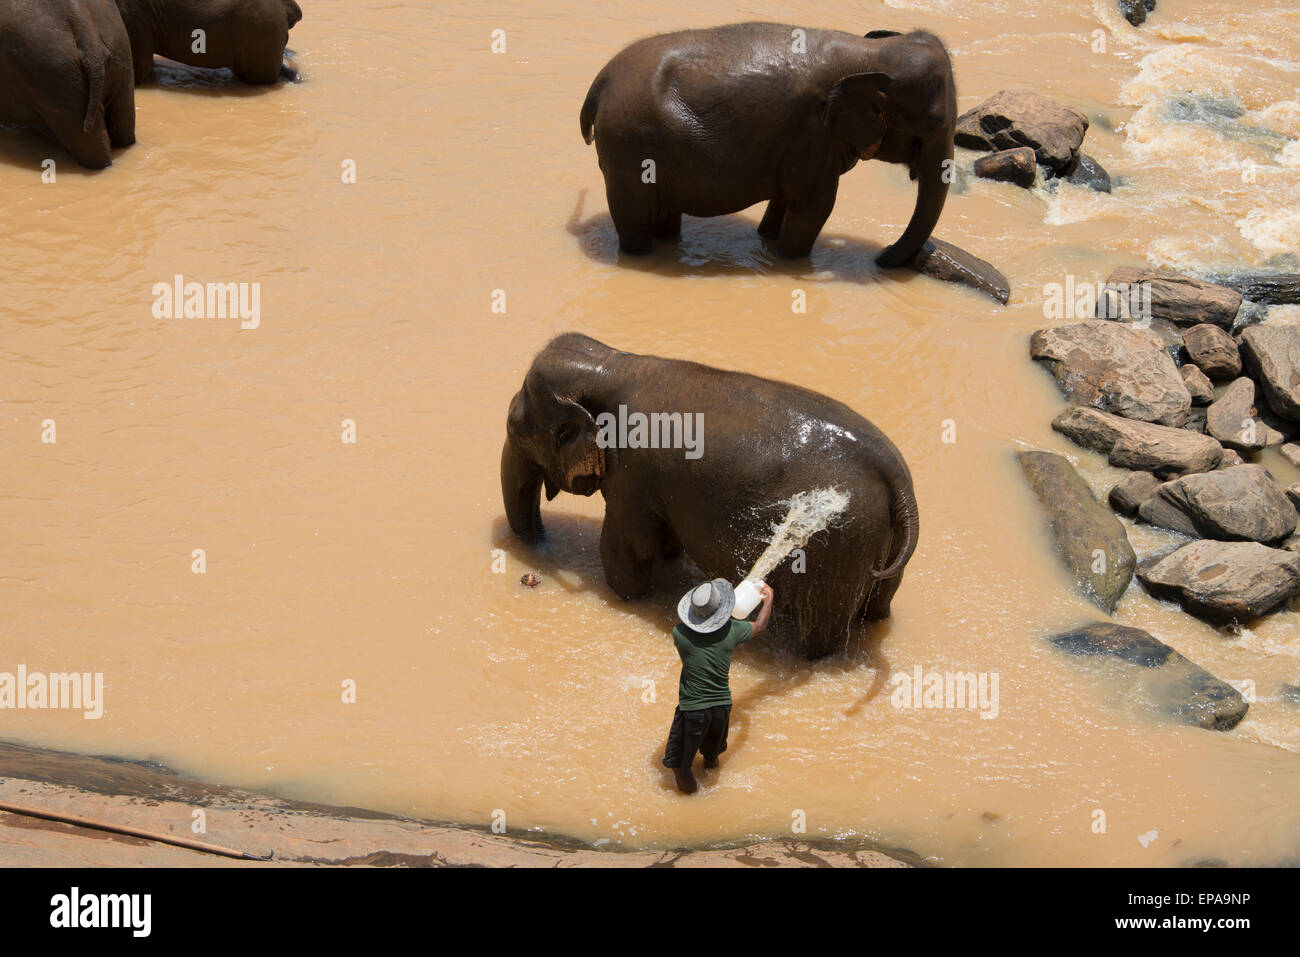 Sri Lanka, Pinnawela Elephant Orphanage, est. in 1975 by the Wildlife Department. Mahout (care giver/trainer) giving bath. Stock Photo